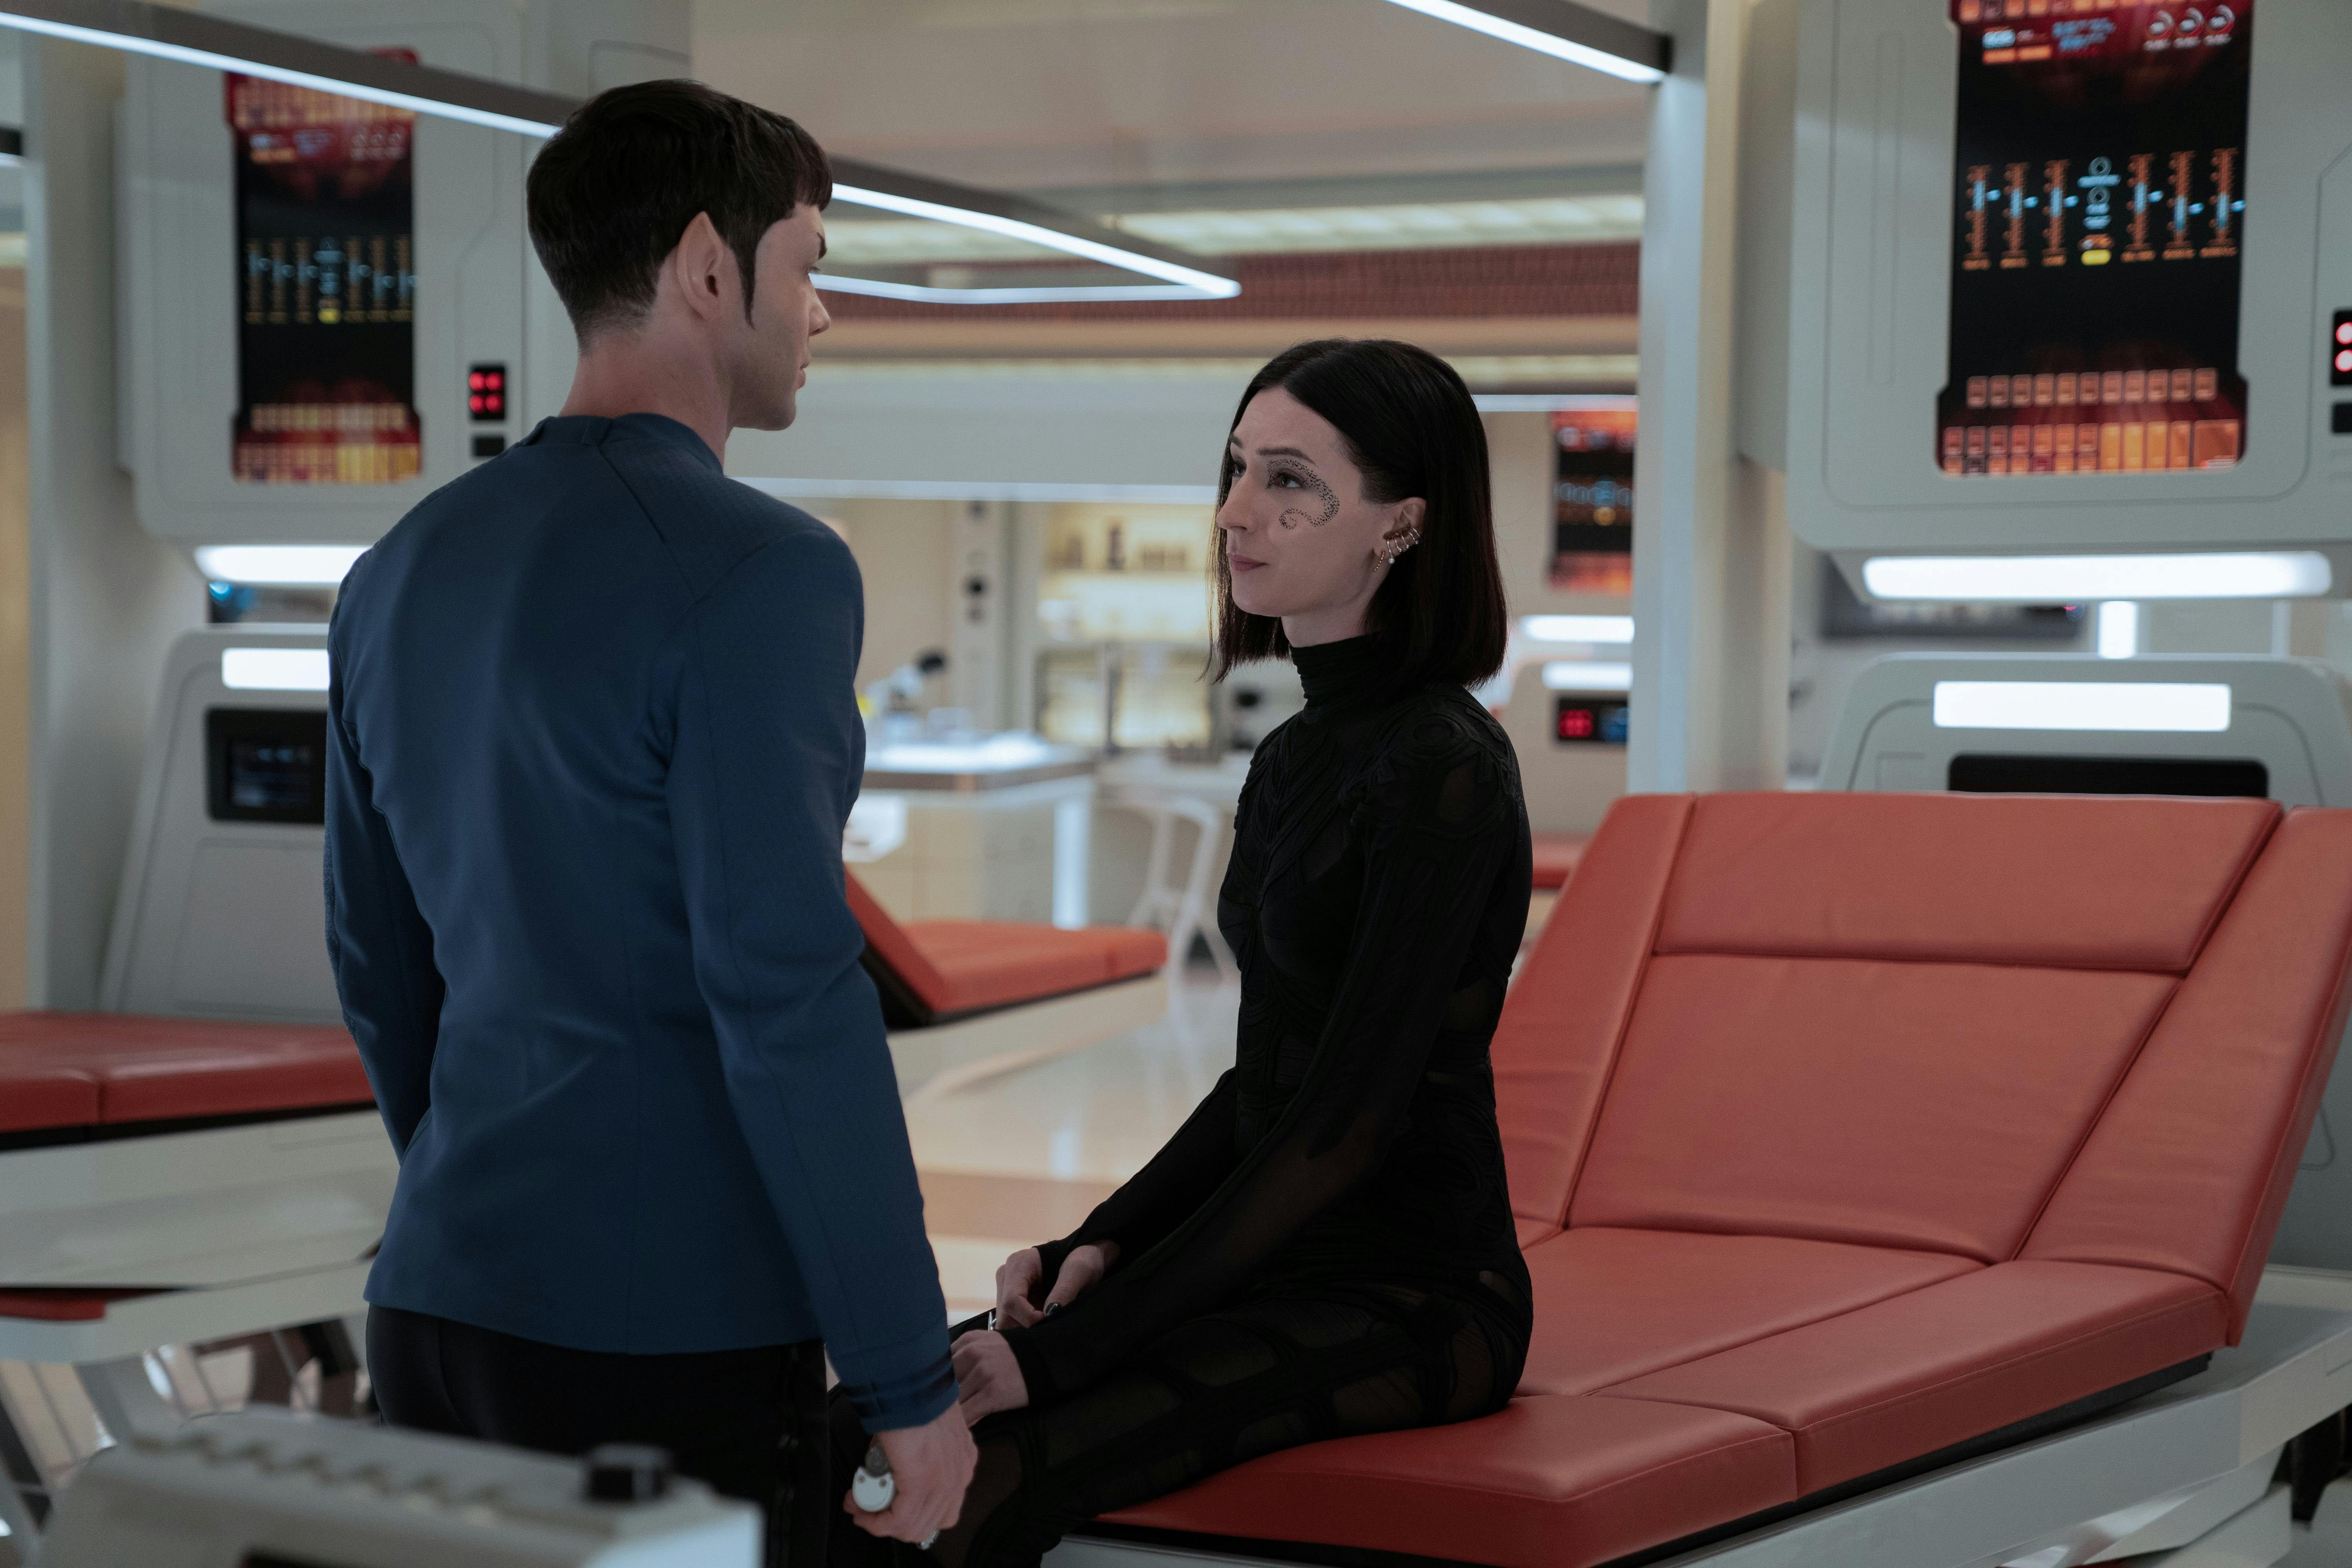 Spock (Strange New Worlds) stands with his back to the camera. He is in medbay, talking to a woman wearing all black with short hair.